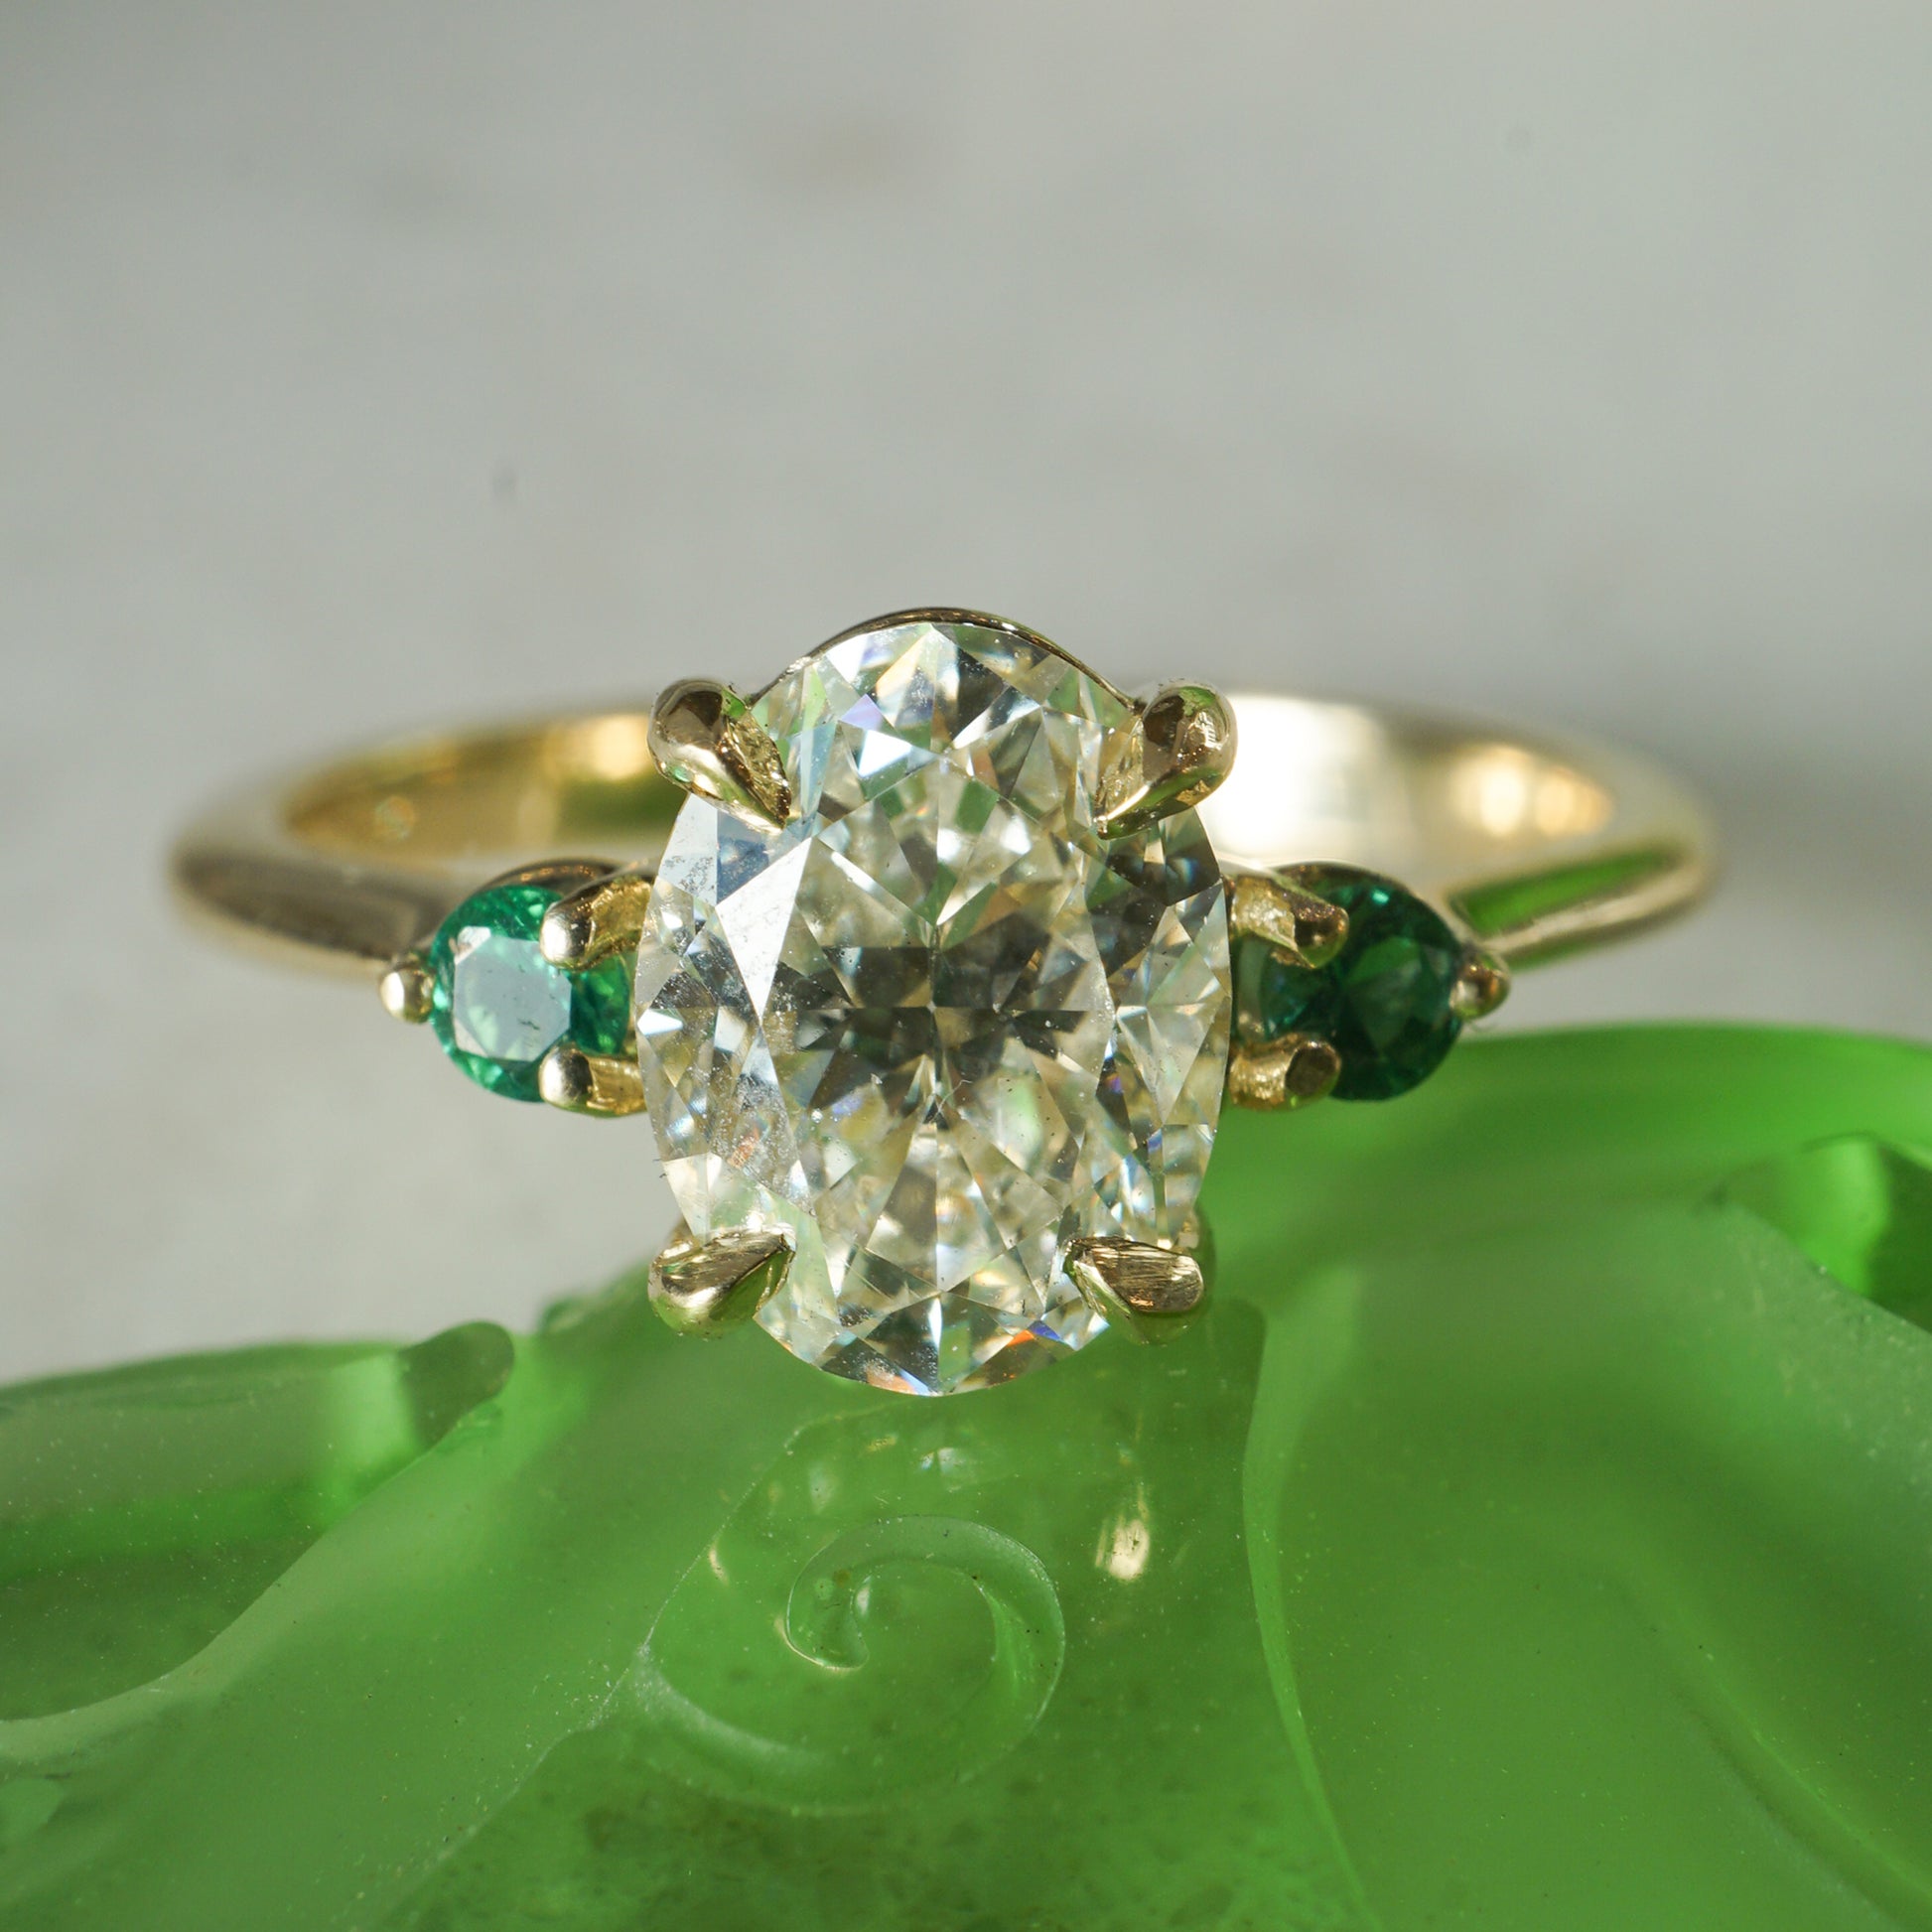 1.51 Oval Cut Diamond Engagement Ring w/ Emerald AccentsComposition: 14 Karat Yellow Gold Ring Size: 7 Total Diamond Weight: 1.51ct Total Gram Weight: 3.0 g Inscription: 14k
      